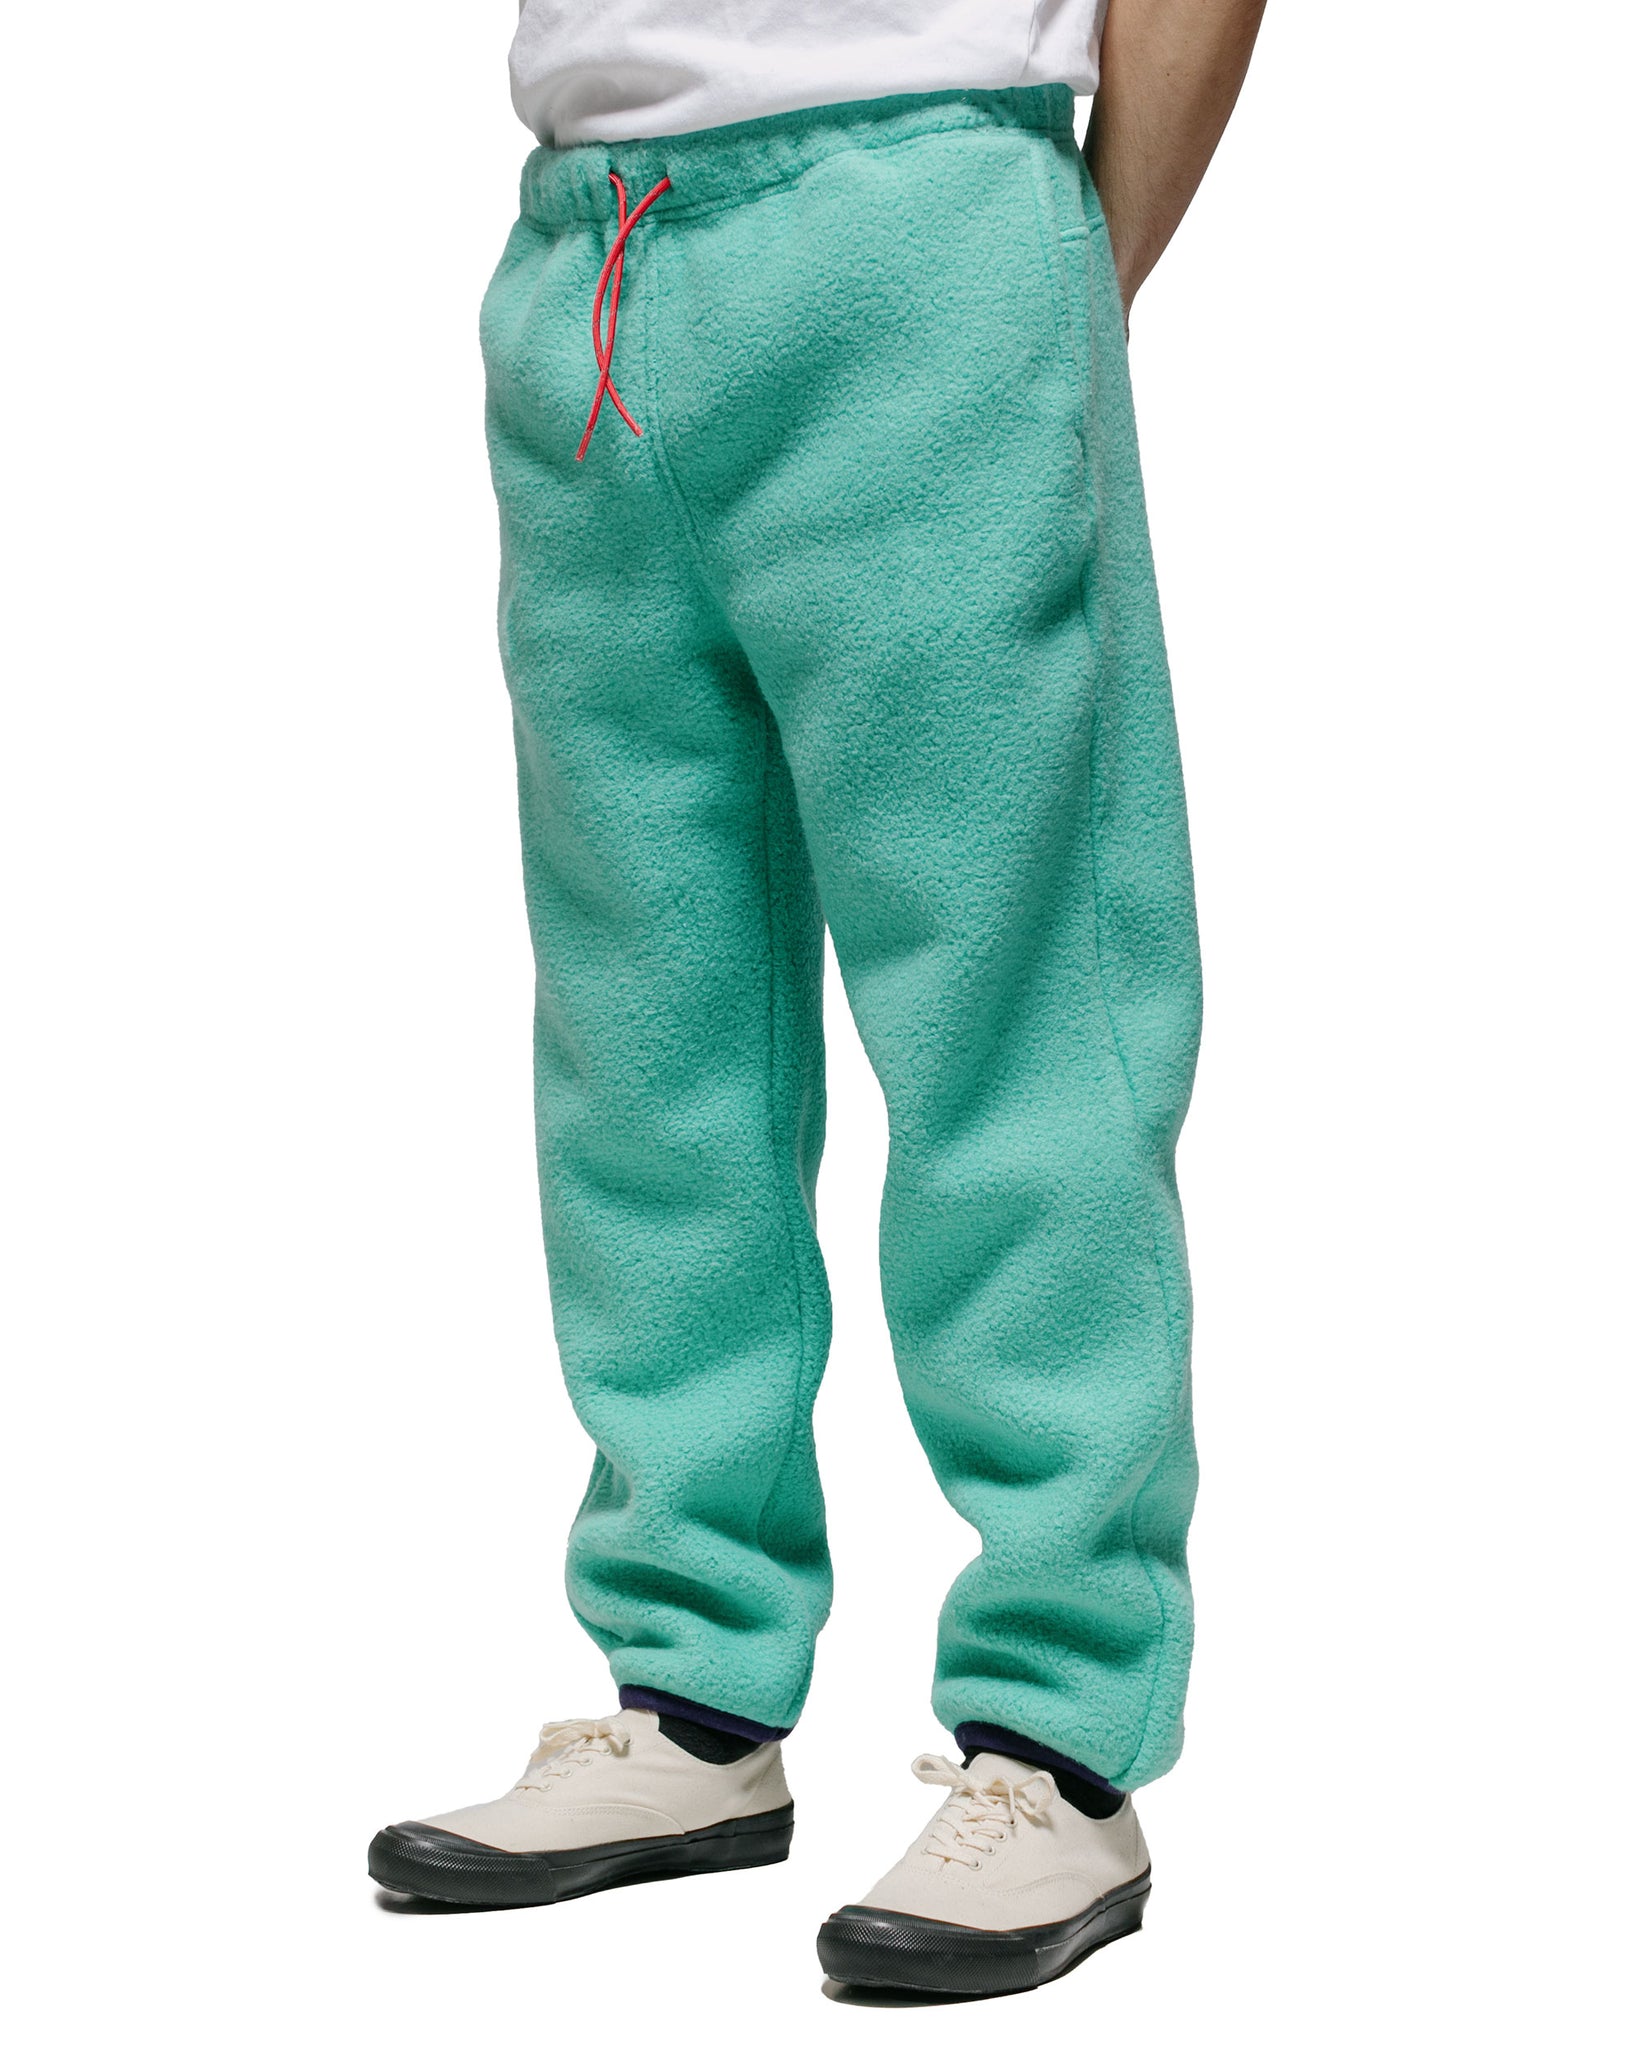 The Real McCoy's MP23105 Fleece Utility Pants Teal model front